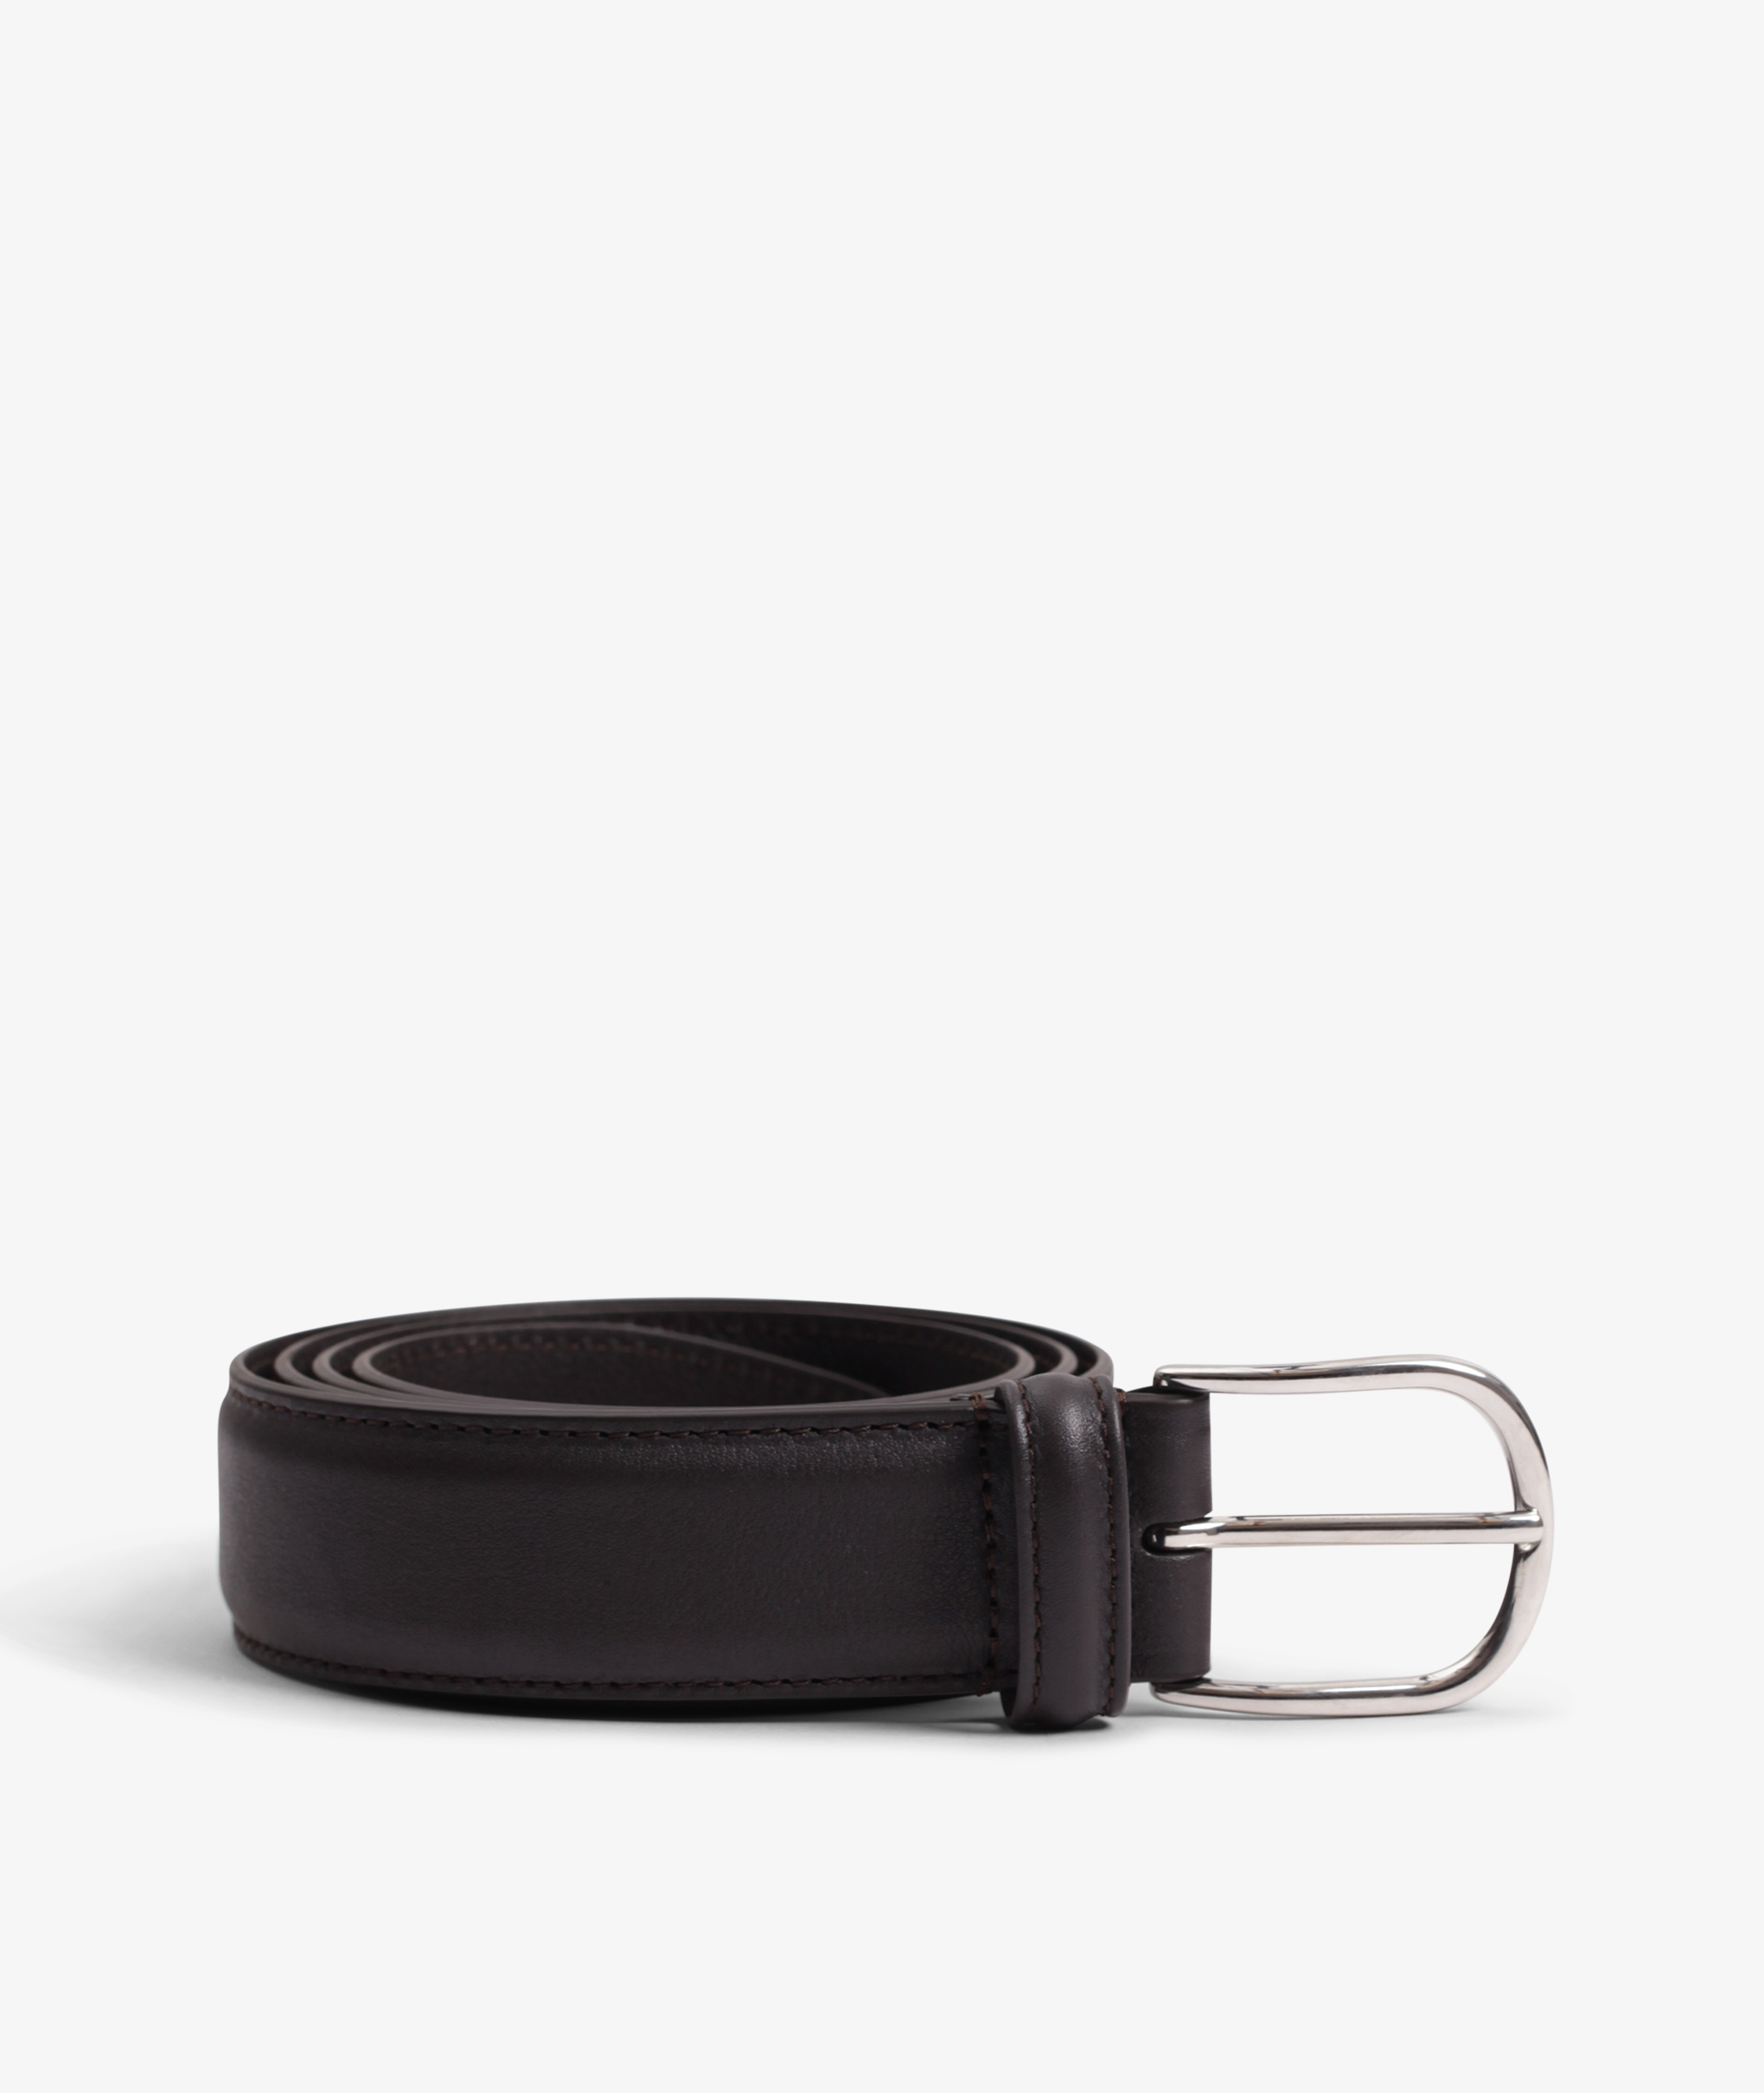 Norse Store  Shipping Worldwide - Anderson's Braided Slim Leather Belt -  Black